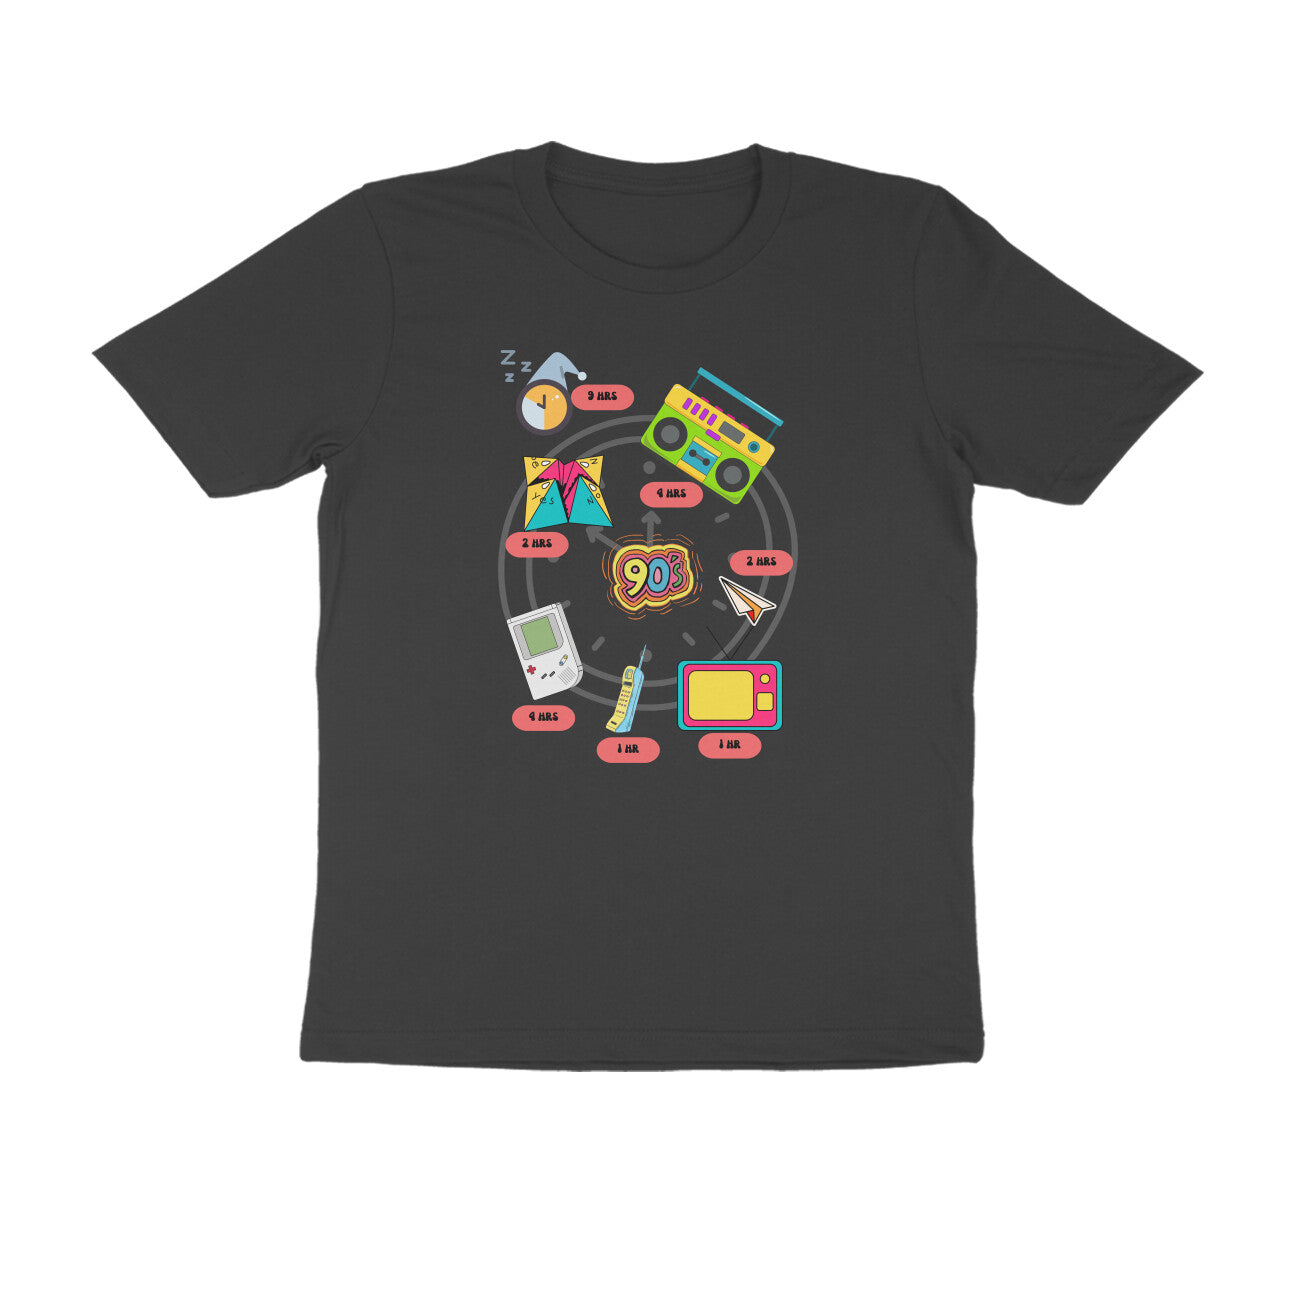 Bilkool Day in the life of 90s Cotton Half Sleeve T- Shirt